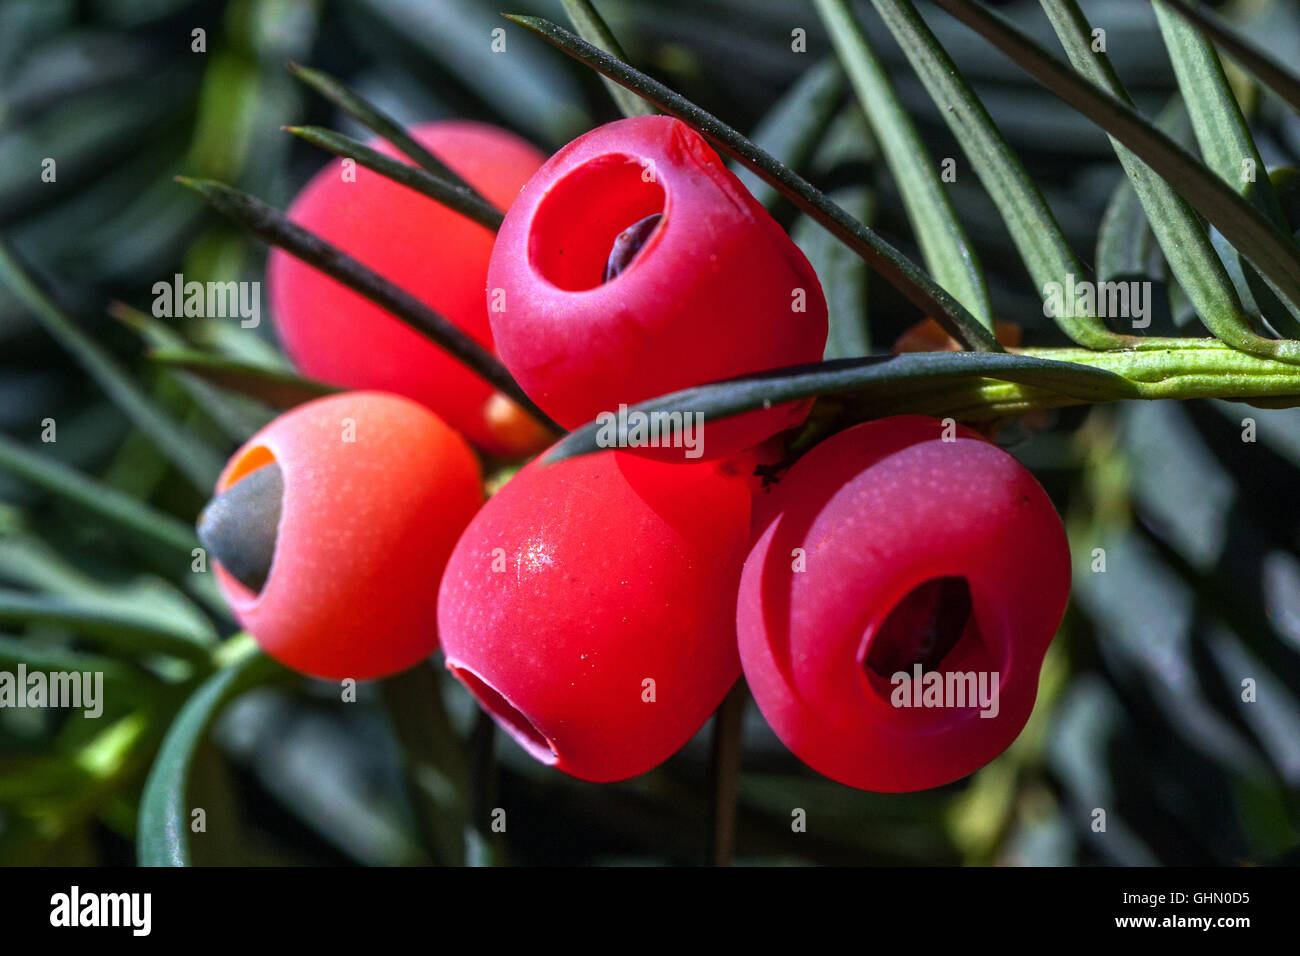 Taxus baccata, European yew, shoot with mature cones, Yew berries close up fruits, berry seeds closeup red berries Taxus baccata Stock Photo